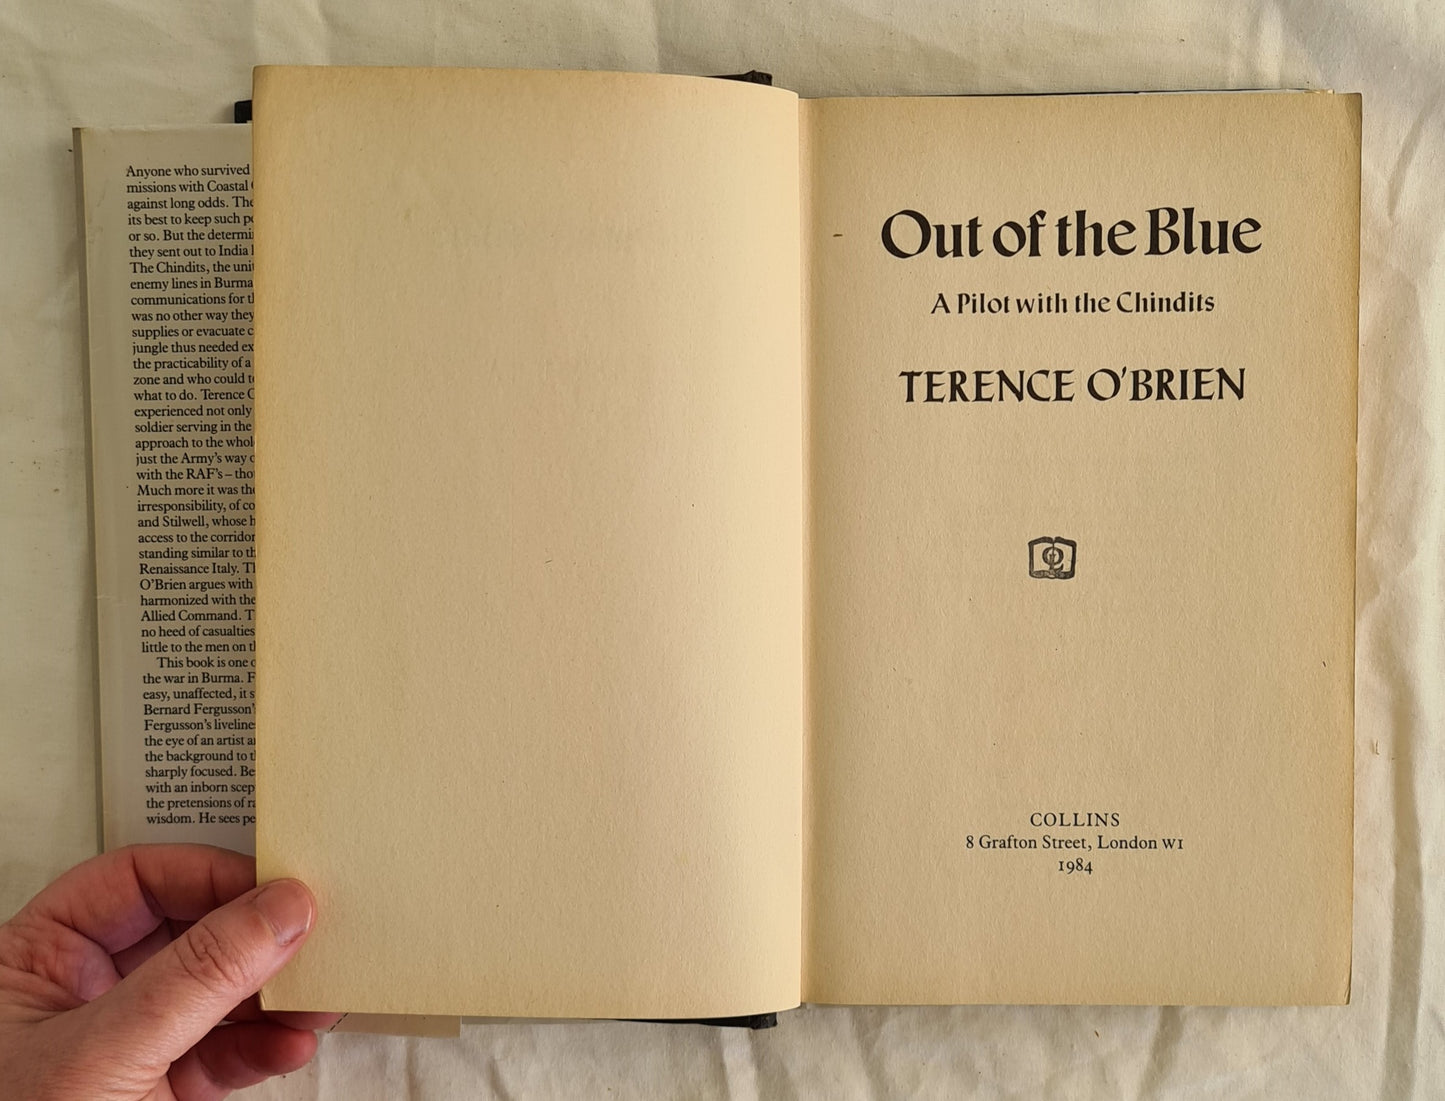 Out of the Blue by Terence O’Brien